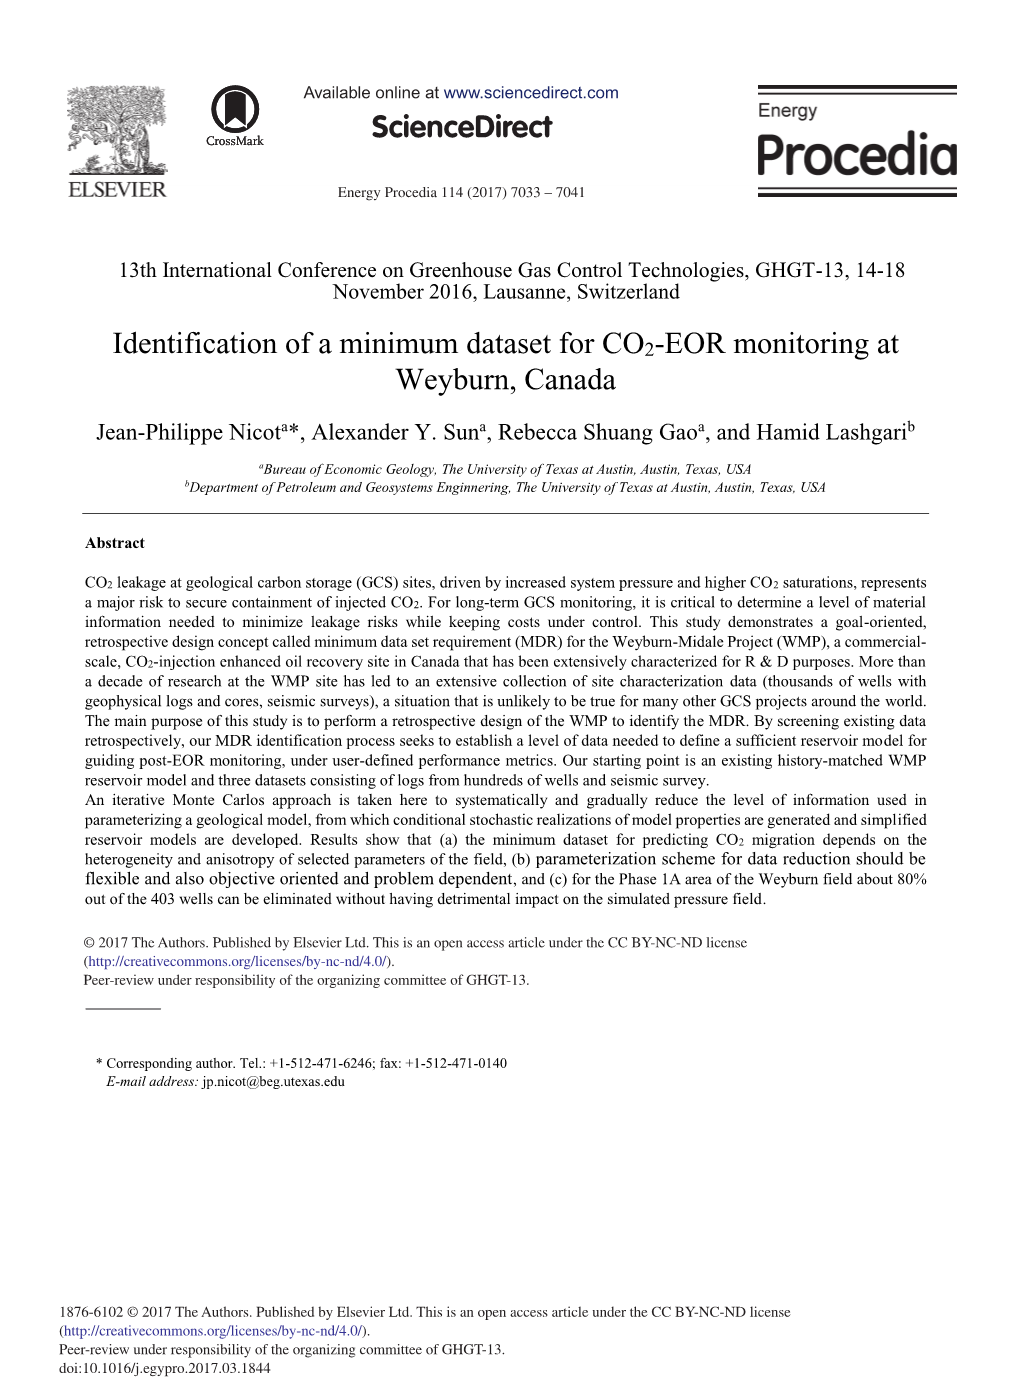 Identification of a Minimum Dataset for CO2-EOR Monitoring at Weyburn, Canada